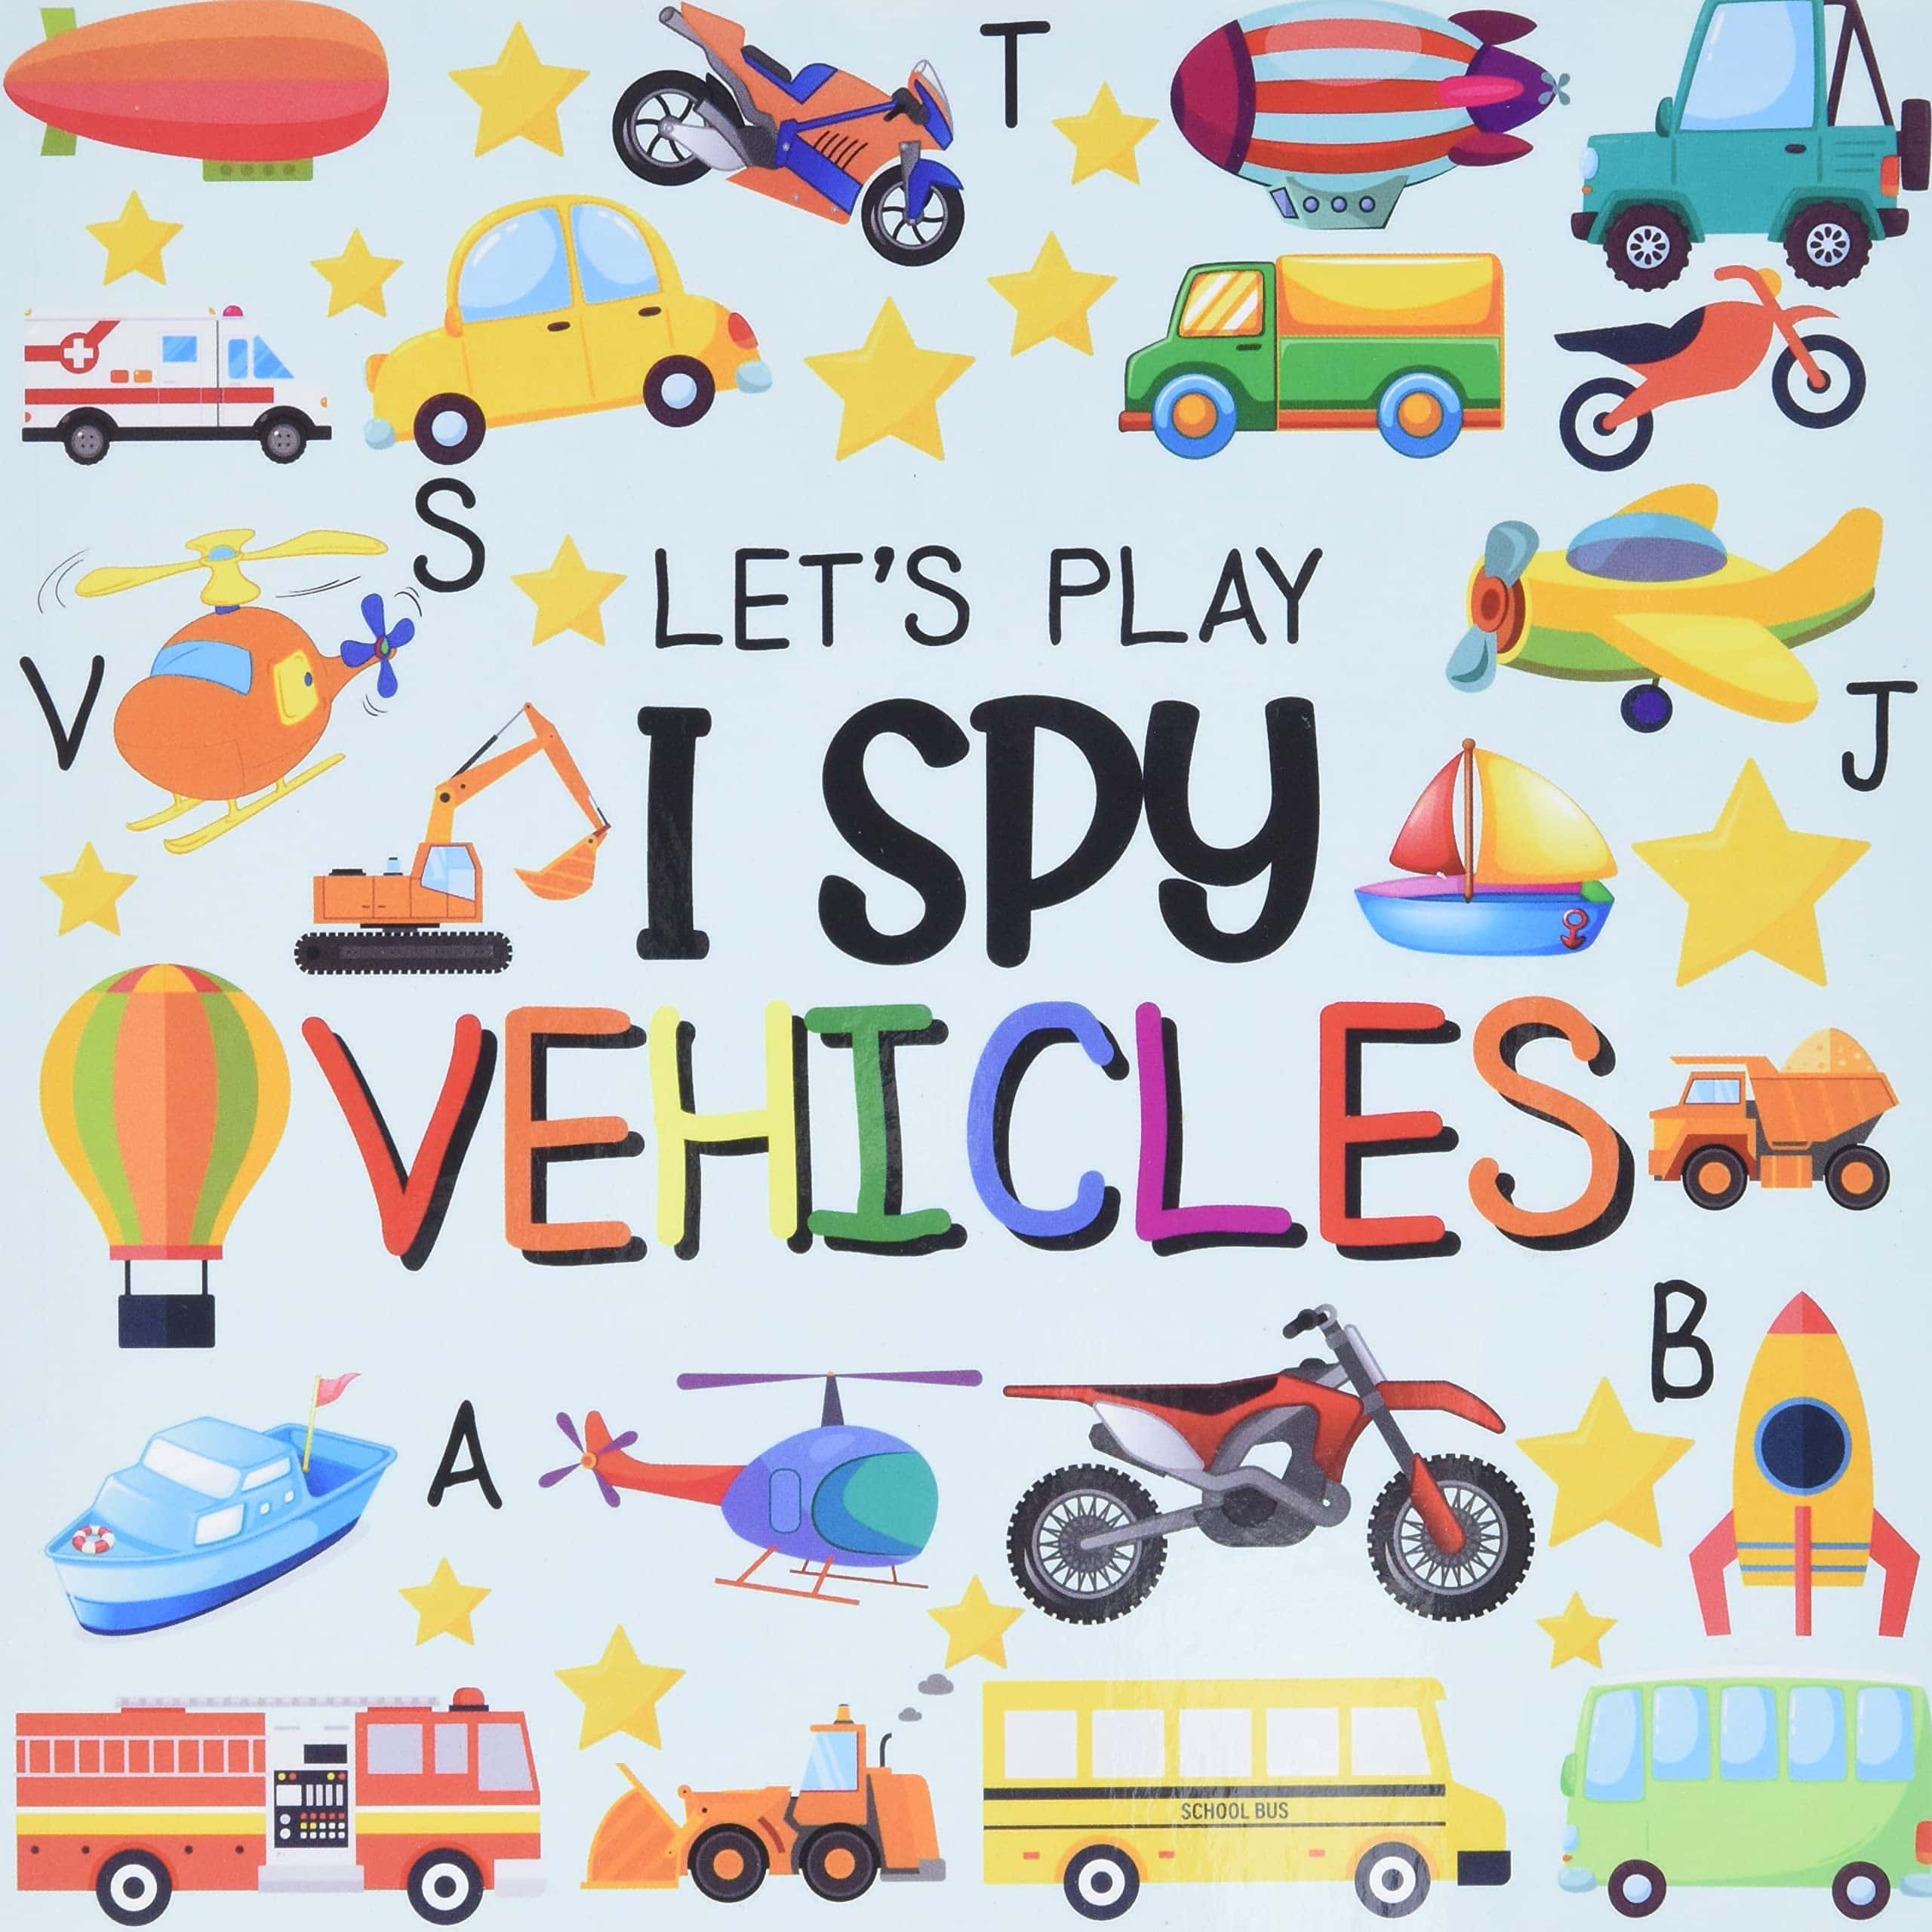 Let's Play I Spy Vehicles book 